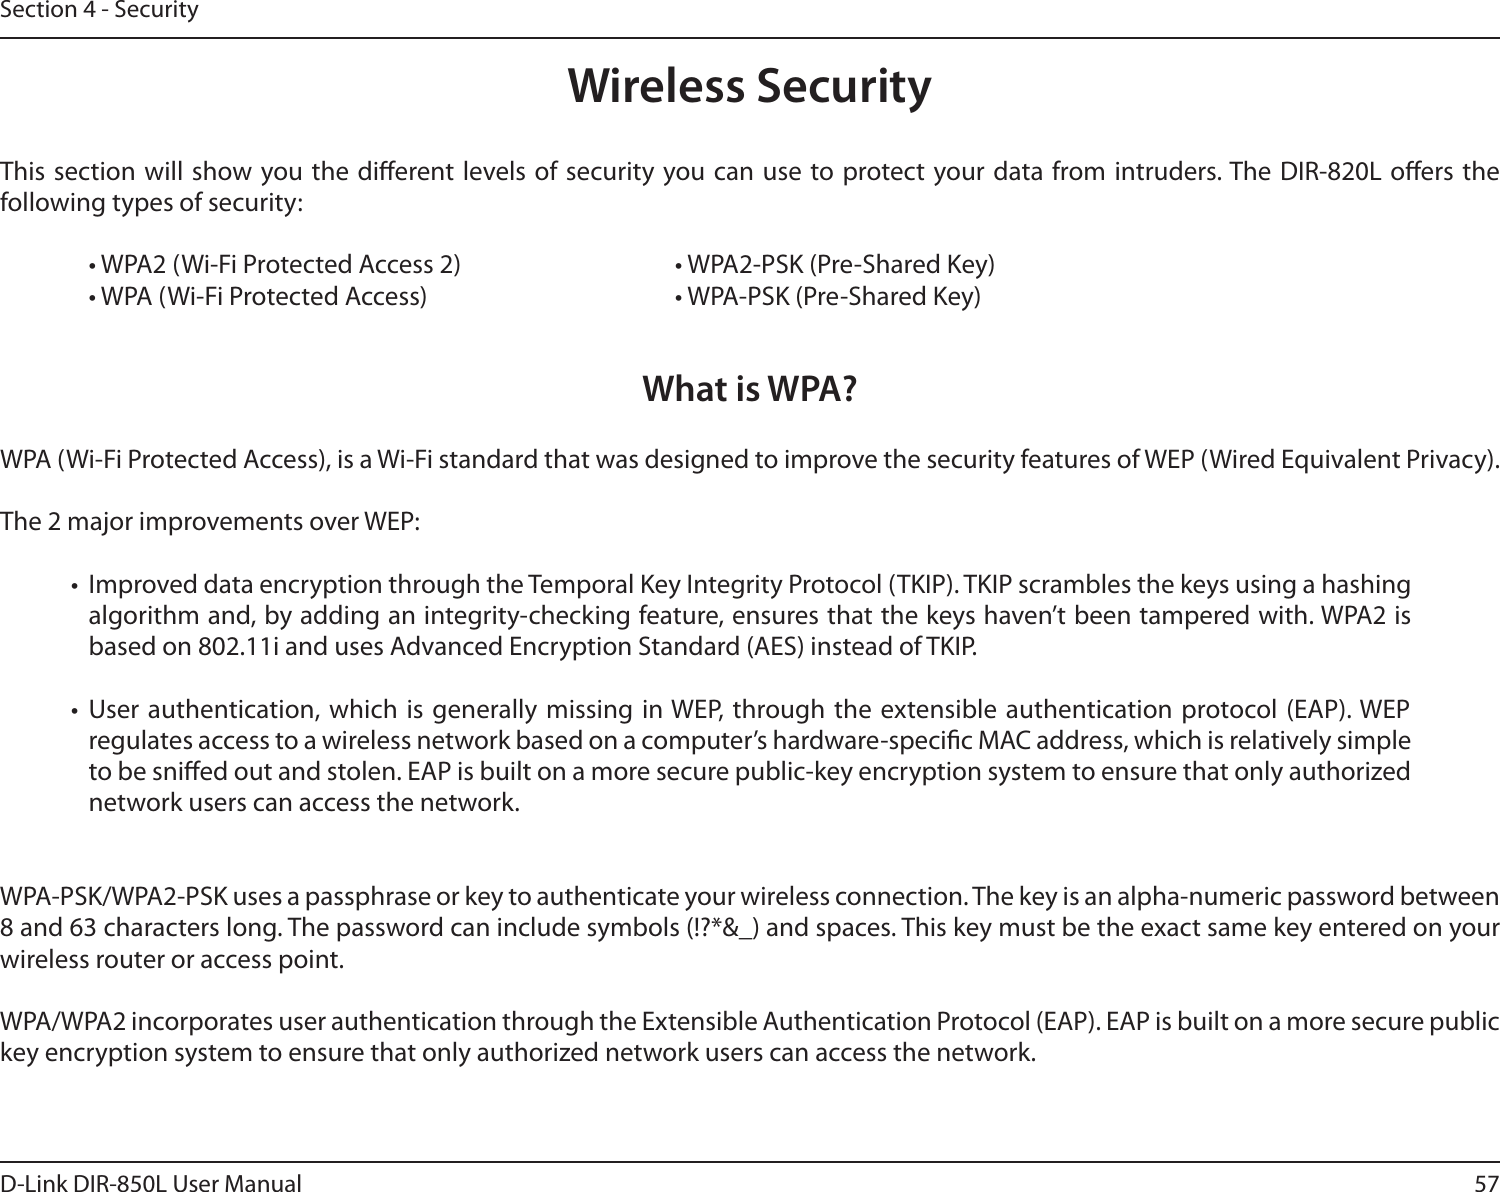 57D-Link DIR-850L User ManualSection 4 - SecurityWireless SecurityThis section will  show you the dierent levels of security  you can use to protect your data from intruders. The DIR-820L oers the following types of security:  • WPA2 (Wi-Fi Protected Access 2)       • WPA2-PSK (Pre-Shared Key)  • WPA (Wi-Fi Protected Access)        • WPA-PSK (Pre-Shared Key)What is WPA?WPA (Wi-Fi Protected Access), is a Wi-Fi standard that was designed to improve the security features of WEP (Wired Equivalent Privacy).  The 2 major improvements over WEP: •  Improved data encryption through the Temporal Key Integrity Protocol (TKIP). TKIP scrambles the keys using a hashing algorithm and, by adding an integrity-checking feature, ensures that the keys haven’t been tampered with. WPA2 is based on 802.11i and uses Advanced Encryption Standard (AES) instead of TKIP.•  User authentication, which is generally missing in WEP, through the extensible authentication protocol (EAP). WEP regulates access to a wireless network based on a computer’s hardware-specic MAC address, which is relatively simple to be snied out and stolen. EAP is built on a more secure public-key encryption system to ensure that only authorized network users can access the network.WPA-PSK/WPA2-PSK uses a passphrase or key to authenticate your wireless connection. The key is an alpha-numeric password between 8 and 63 characters long. The password can include symbols (!?*&amp;_) and spaces. This key must be the exact same key entered on your wireless router or access point.WPA/WPA2 incorporates user authentication through the Extensible Authentication Protocol (EAP). EAP is built on a more secure public key encryption system to ensure that only authorized network users can access the network.